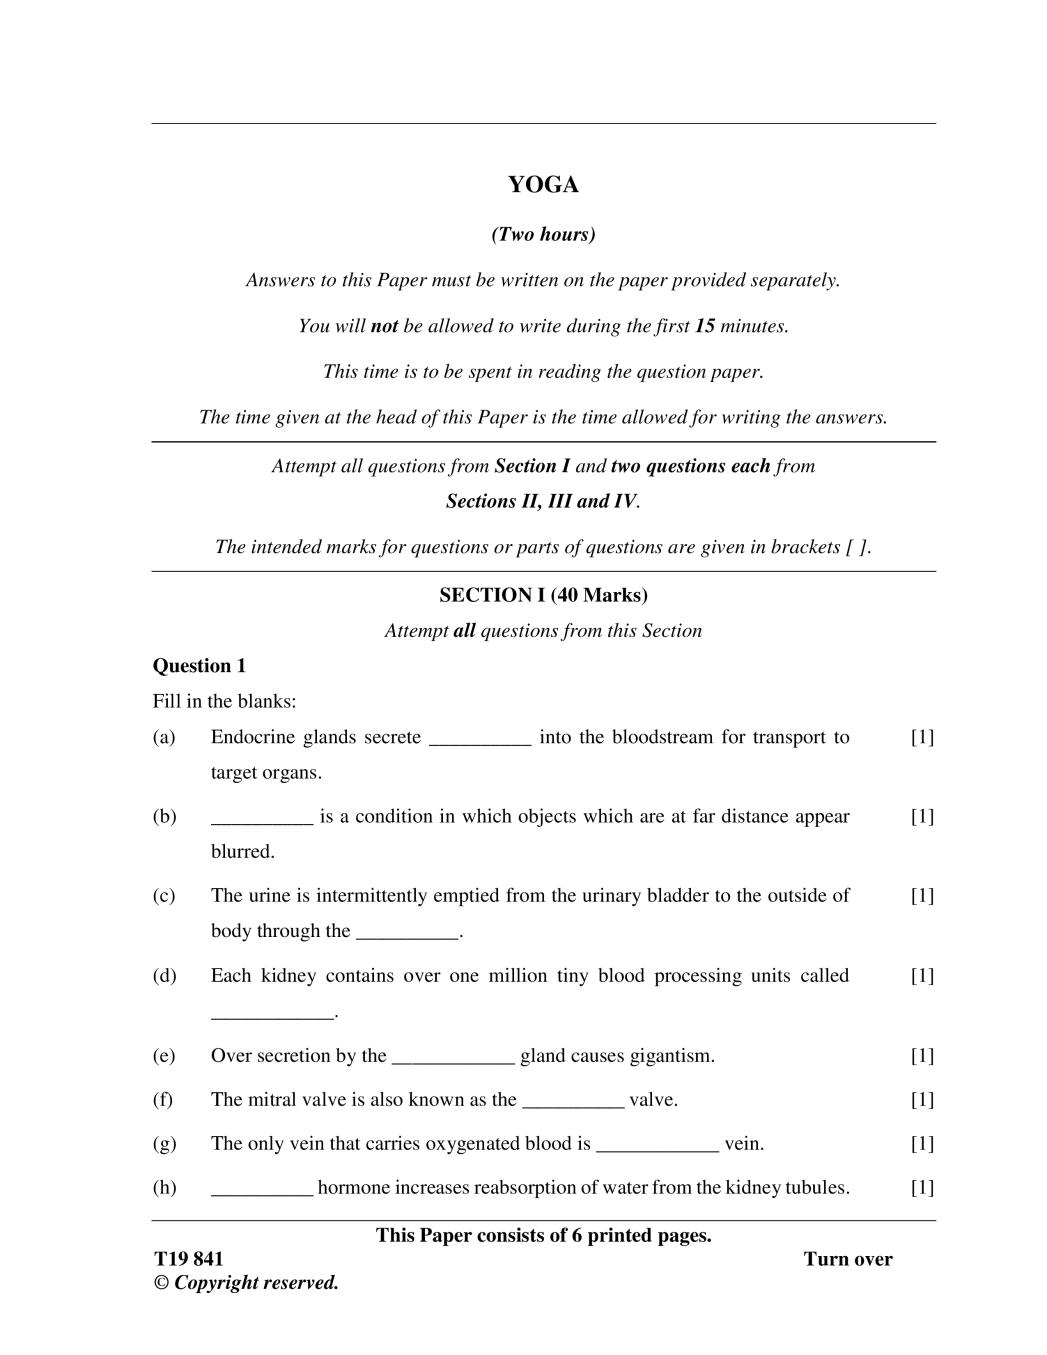 ICSE Class 10 Question Paper 2019 for Yoga  - Page 1